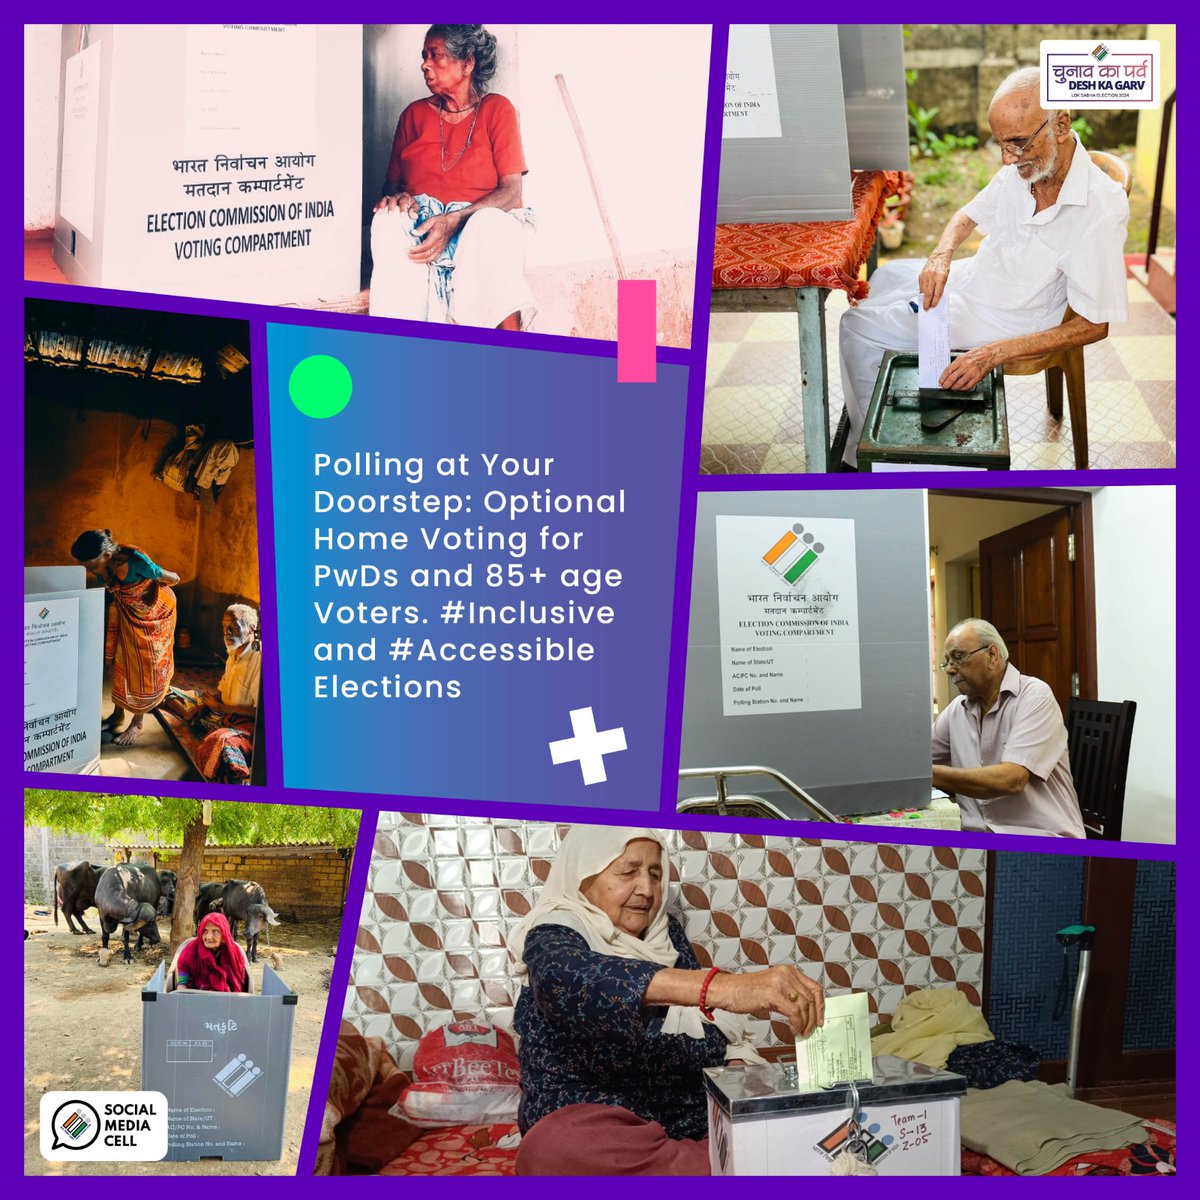 Bringing Democracy Home: Empowering Every Voice with Optional Home Voting for PwDs and 85+ age voters.✨ #YouAreTheOne #ChunavKaParv #DeshKaGarv #IVote4Sure #Election2024